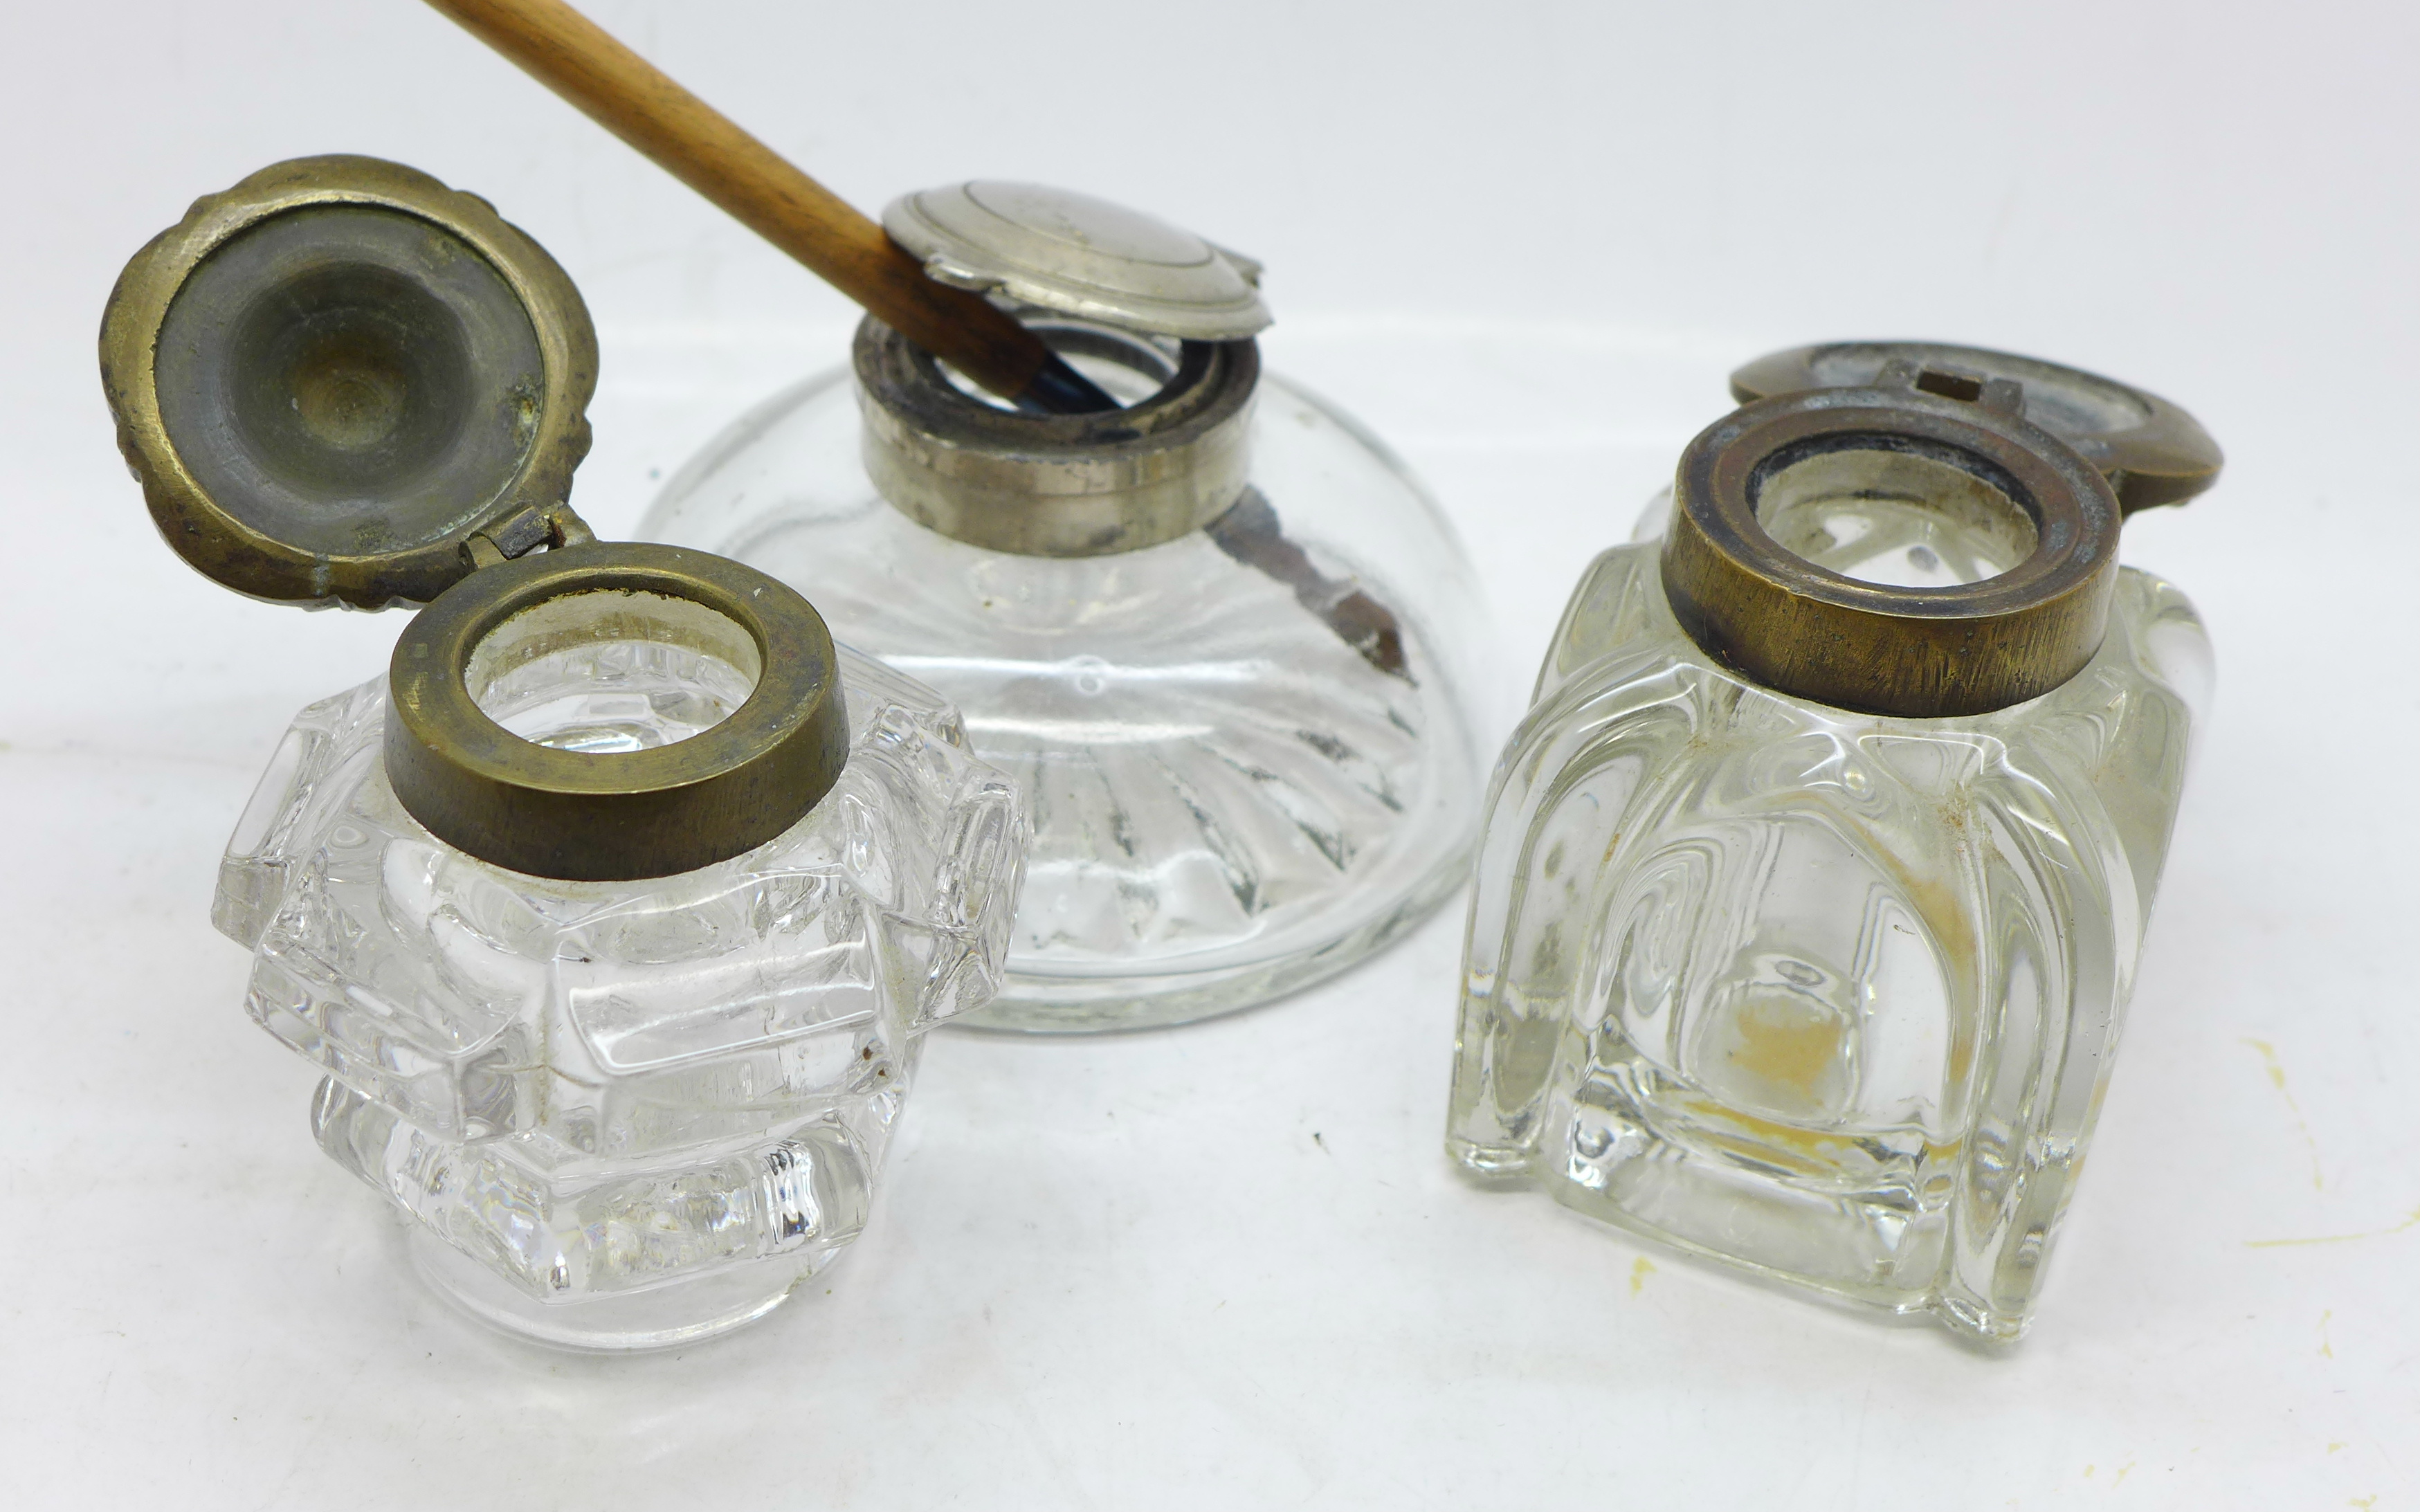 Three Edwardian glass inkwells and a dip pen - Image 6 of 6